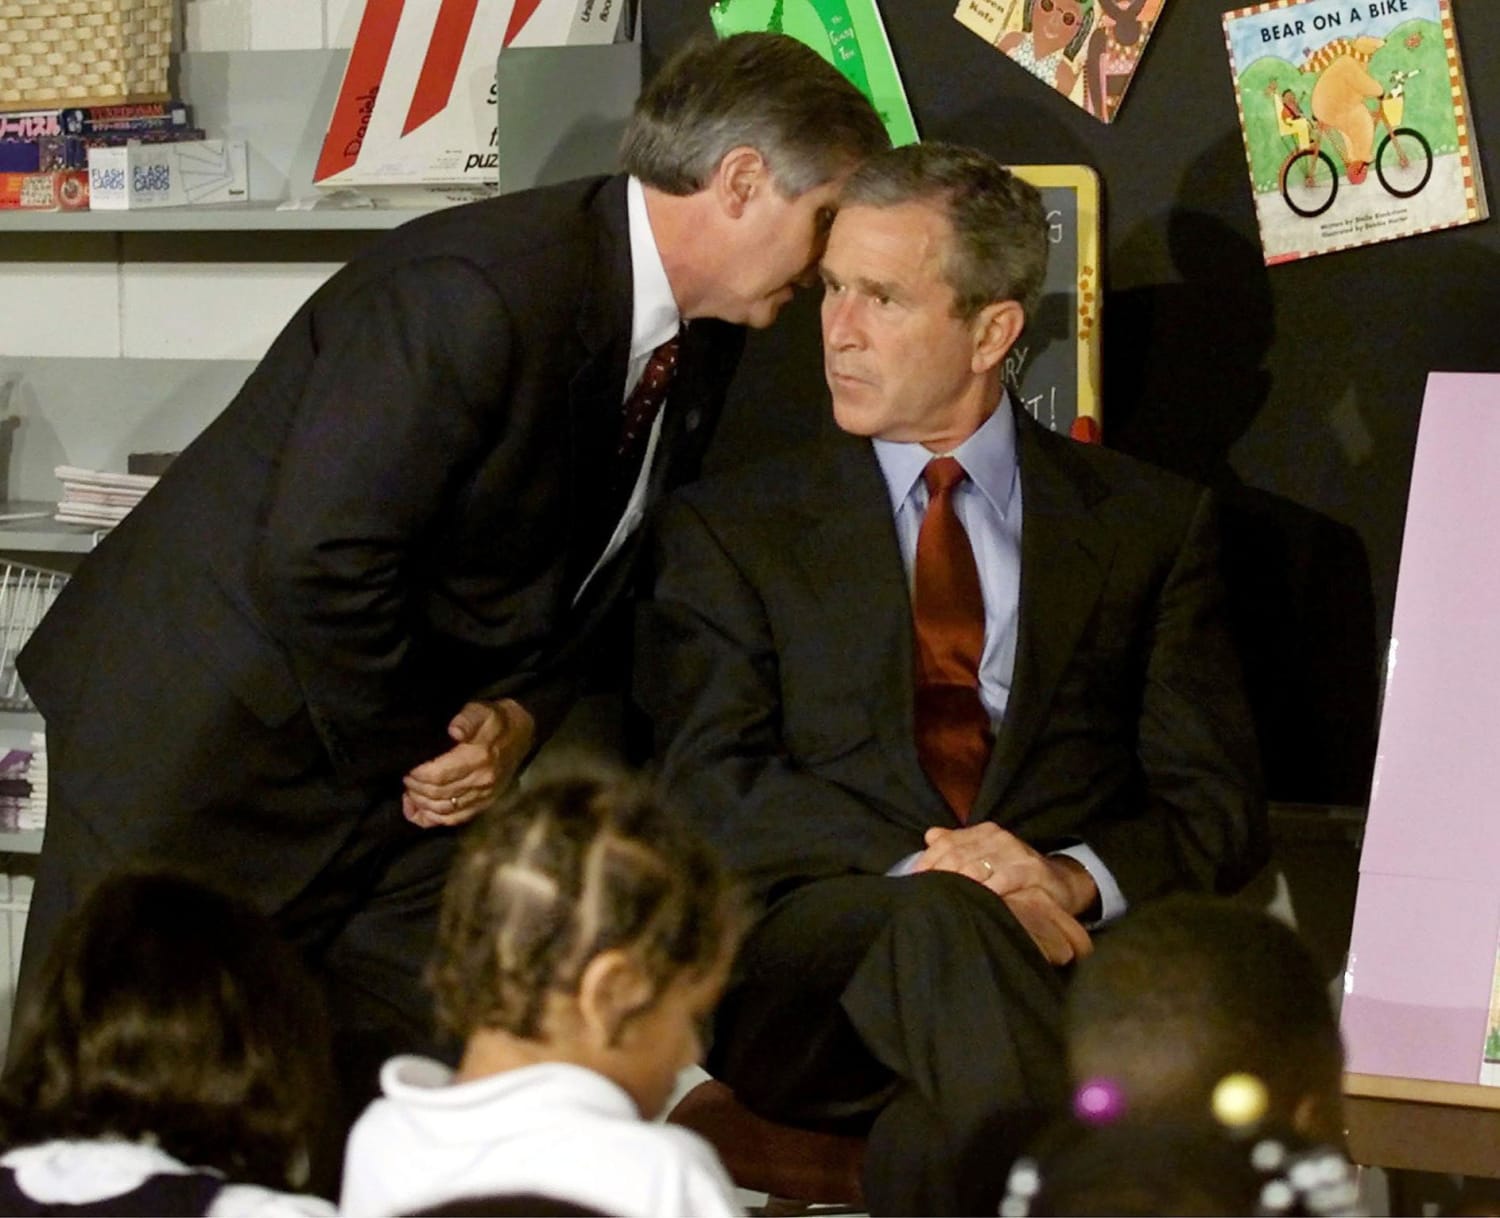 Chief of Staff Andy Card whispers into the ear of President George W. Bush to give him word of the plane crashes into the World Trade Center, during a visit to the Emma E. Booker Elementary School in Sarasota. Tuesday, Sept. 11, 2001.